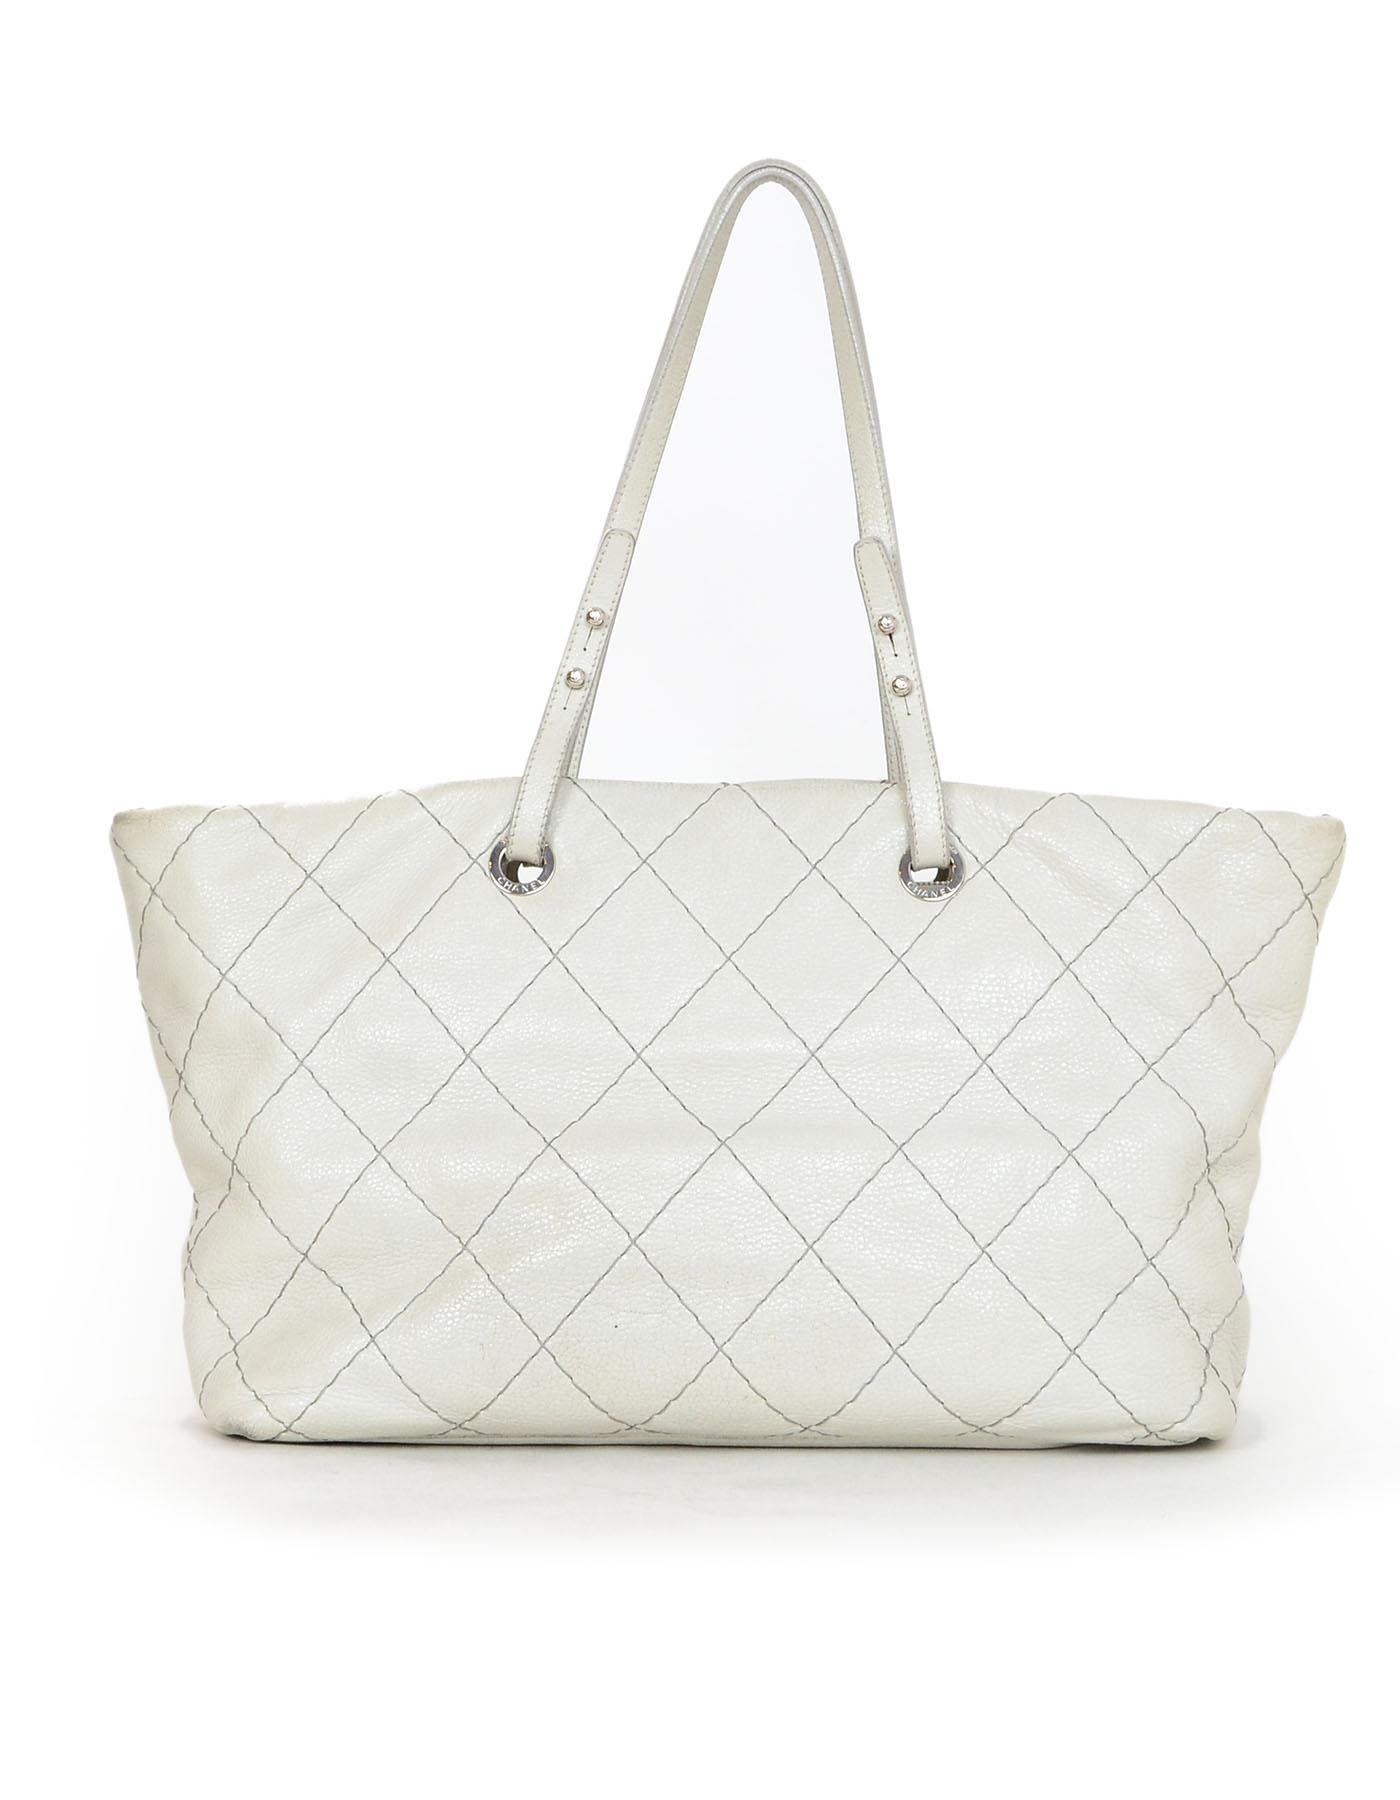 Gray Chanel Off-White Glazed Calfskin Large On The Road Tote Bag